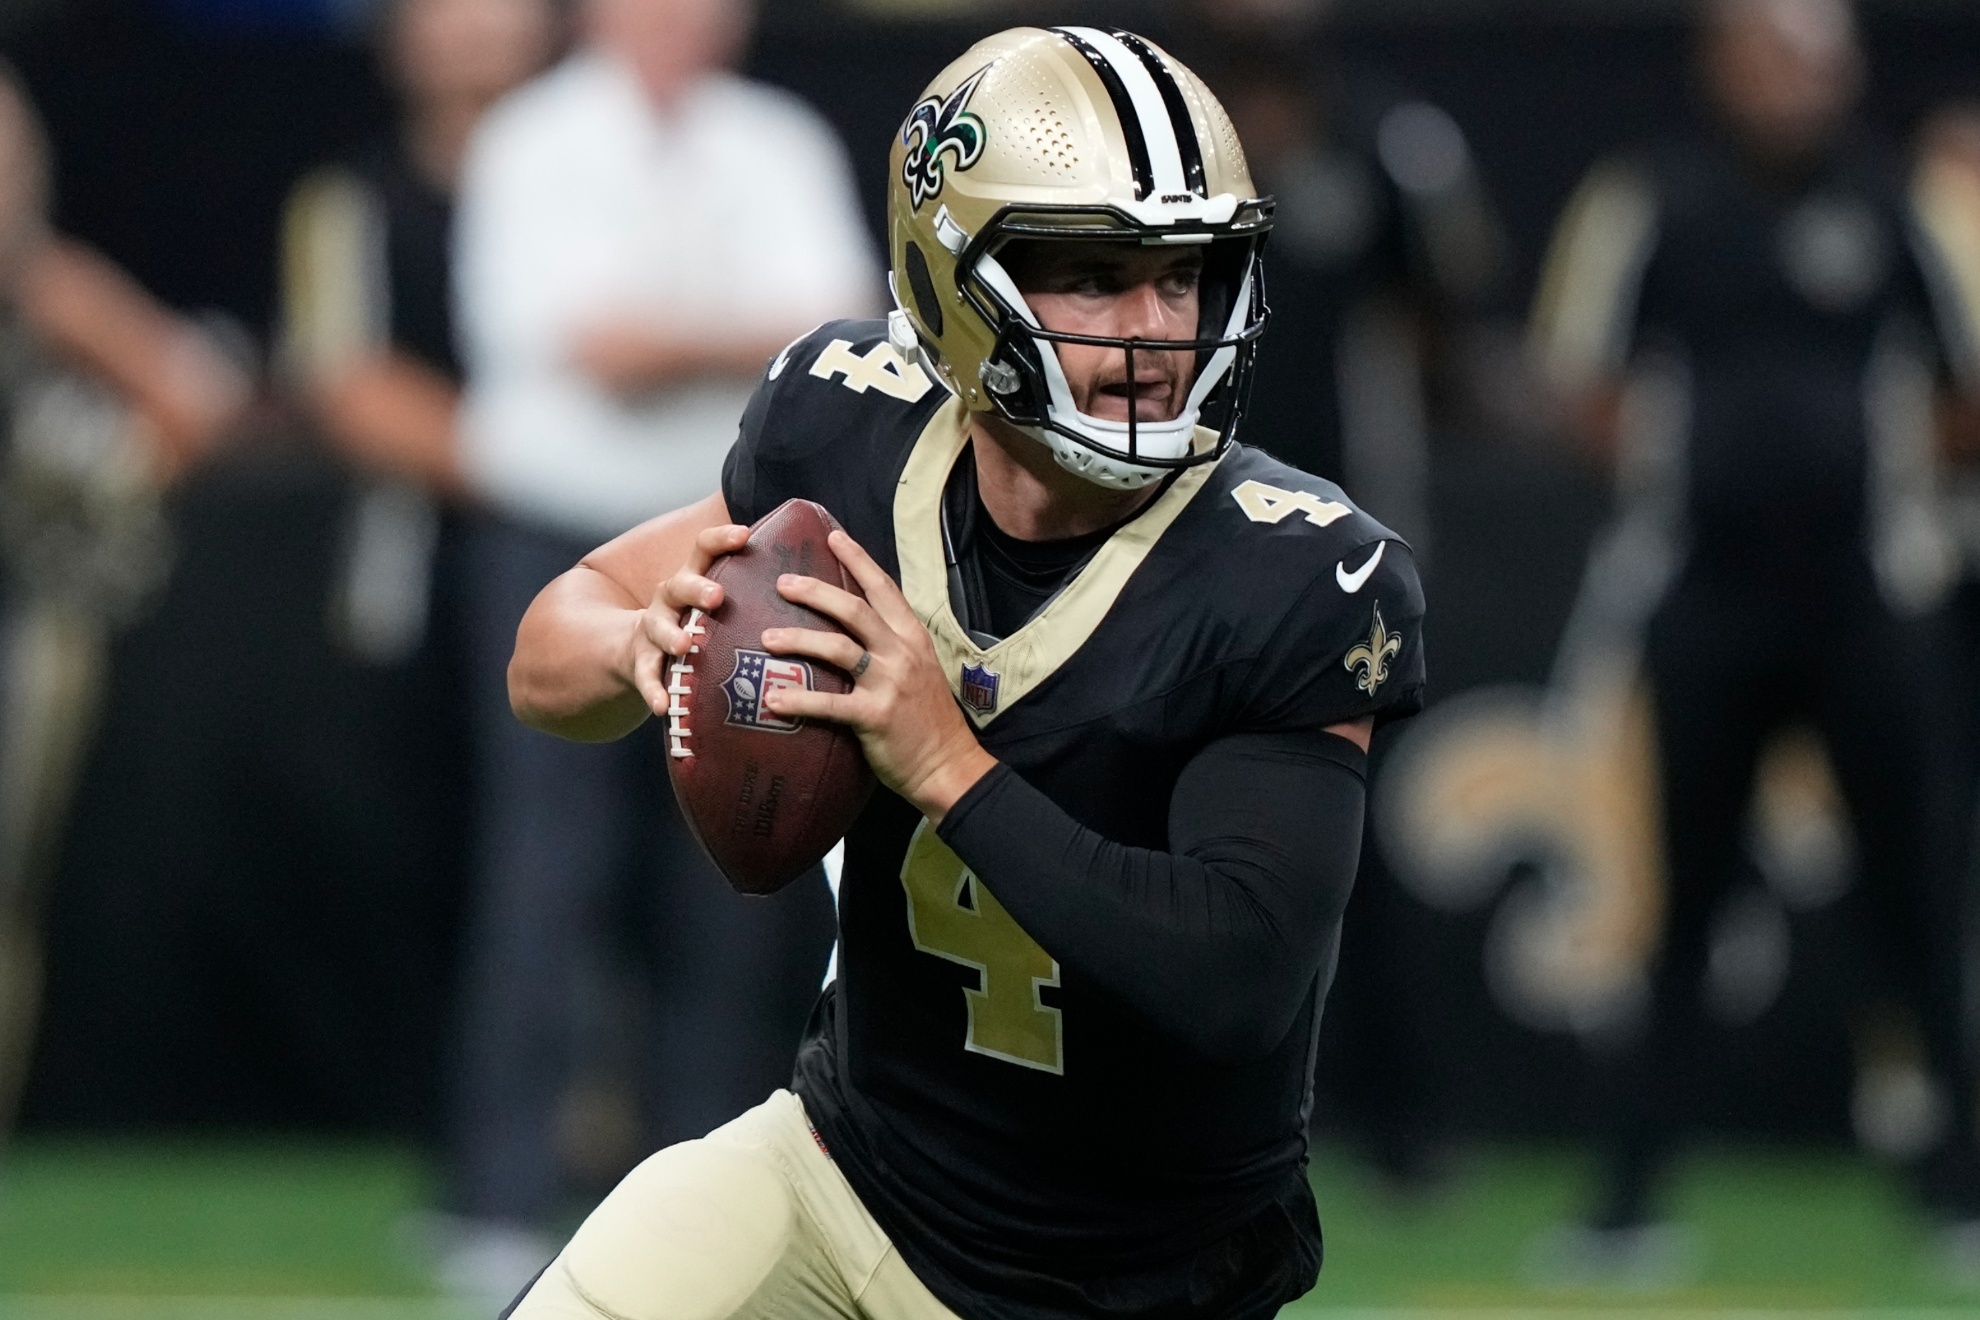 Saints quarterback Derek Carr scored a touchdown in his first game with New Orleans